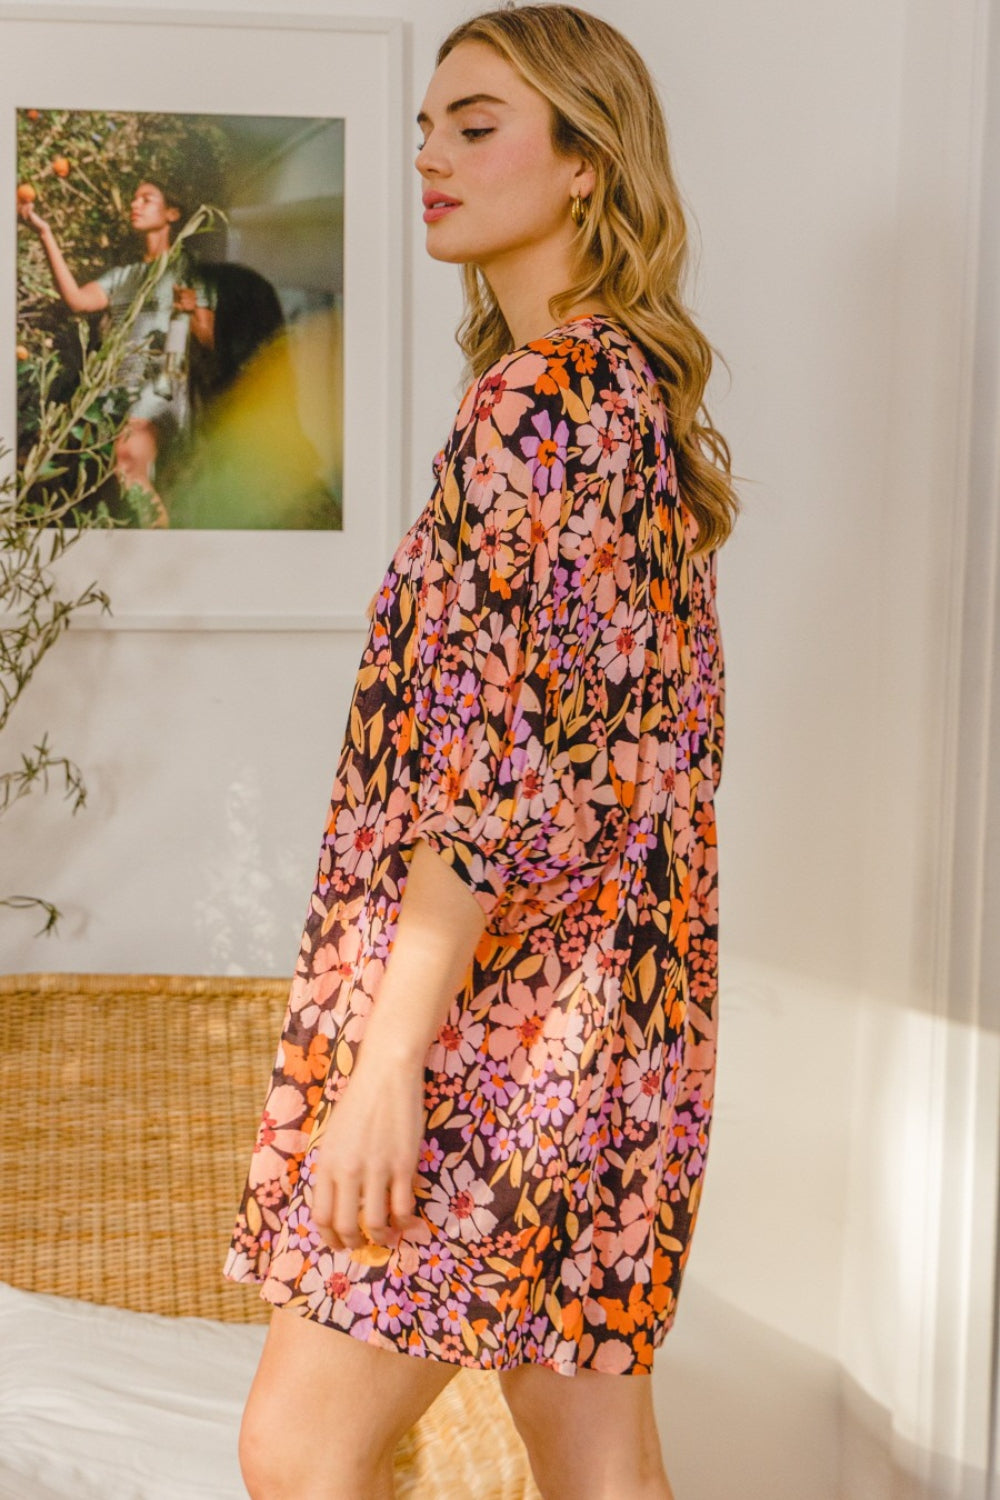 The Floral Tied Neck Mini Dress is a charming and feminine choice for any occasion. Its floral pattern adds a touch of elegance, while the tied neck detail offers a lovely and unique feature. This mini dress is perfect for a summer day out or a special event where you want to stand out.  S-3X